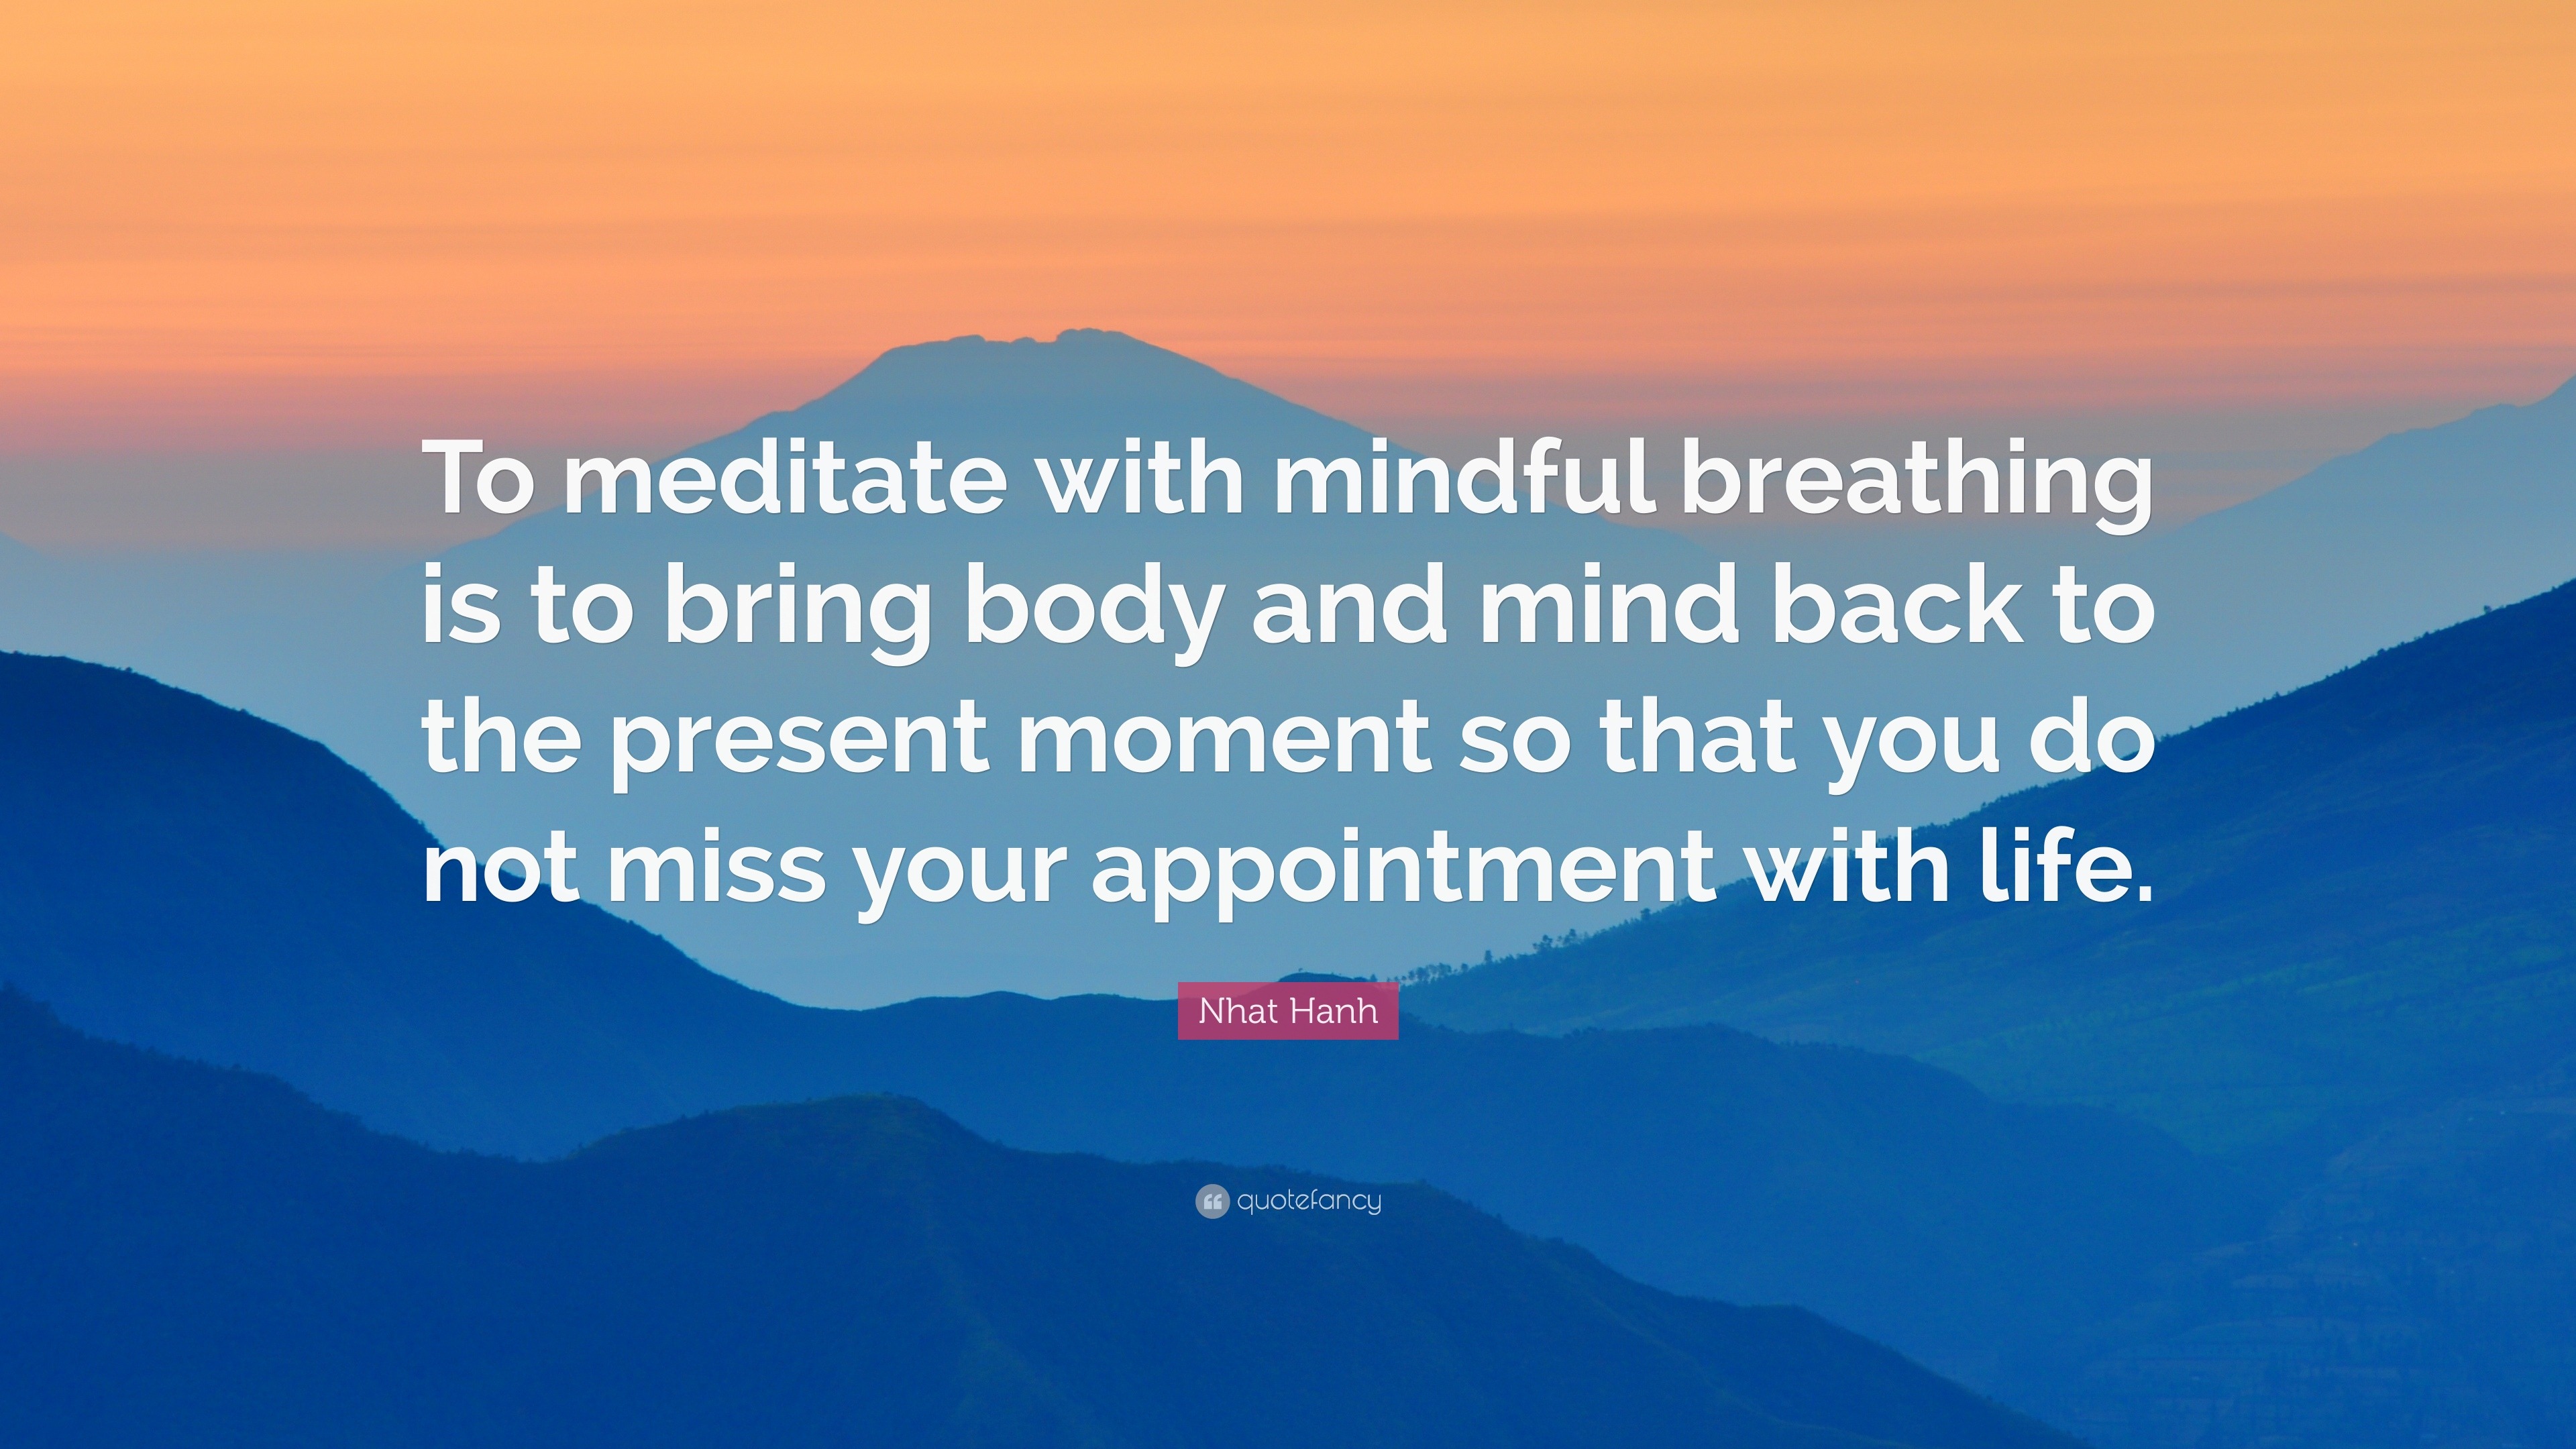 Nhat Hanh Quote: “To meditate with mindful breathing is to bring ...